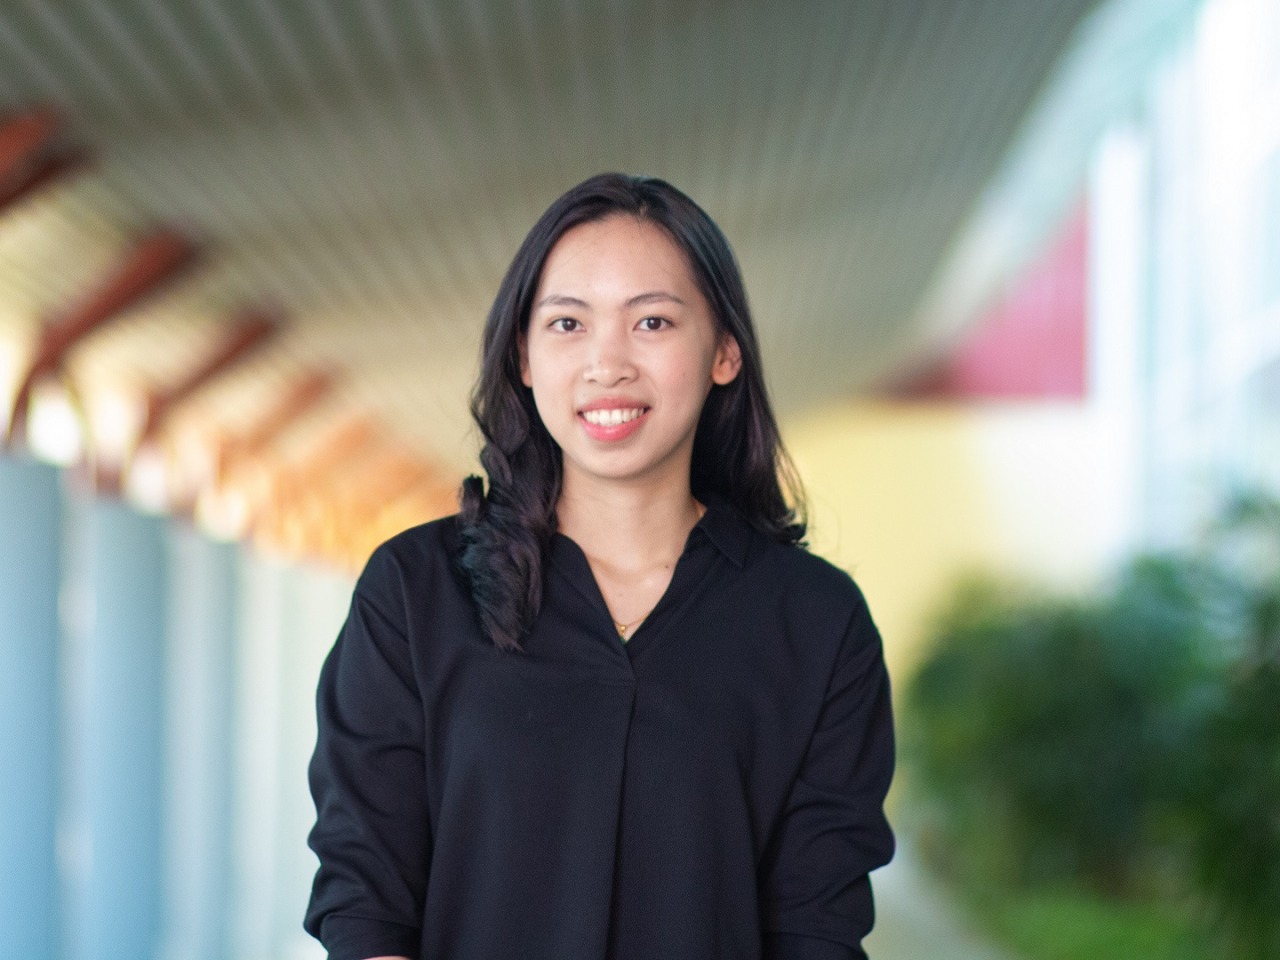 “Being able to further my studies at Curtin Malaysia has been one of the biggest blessings in my life. I chose Curtin Malaysia not just because it is near to my home country but I can also get an internationally recognised Australian degree at very...